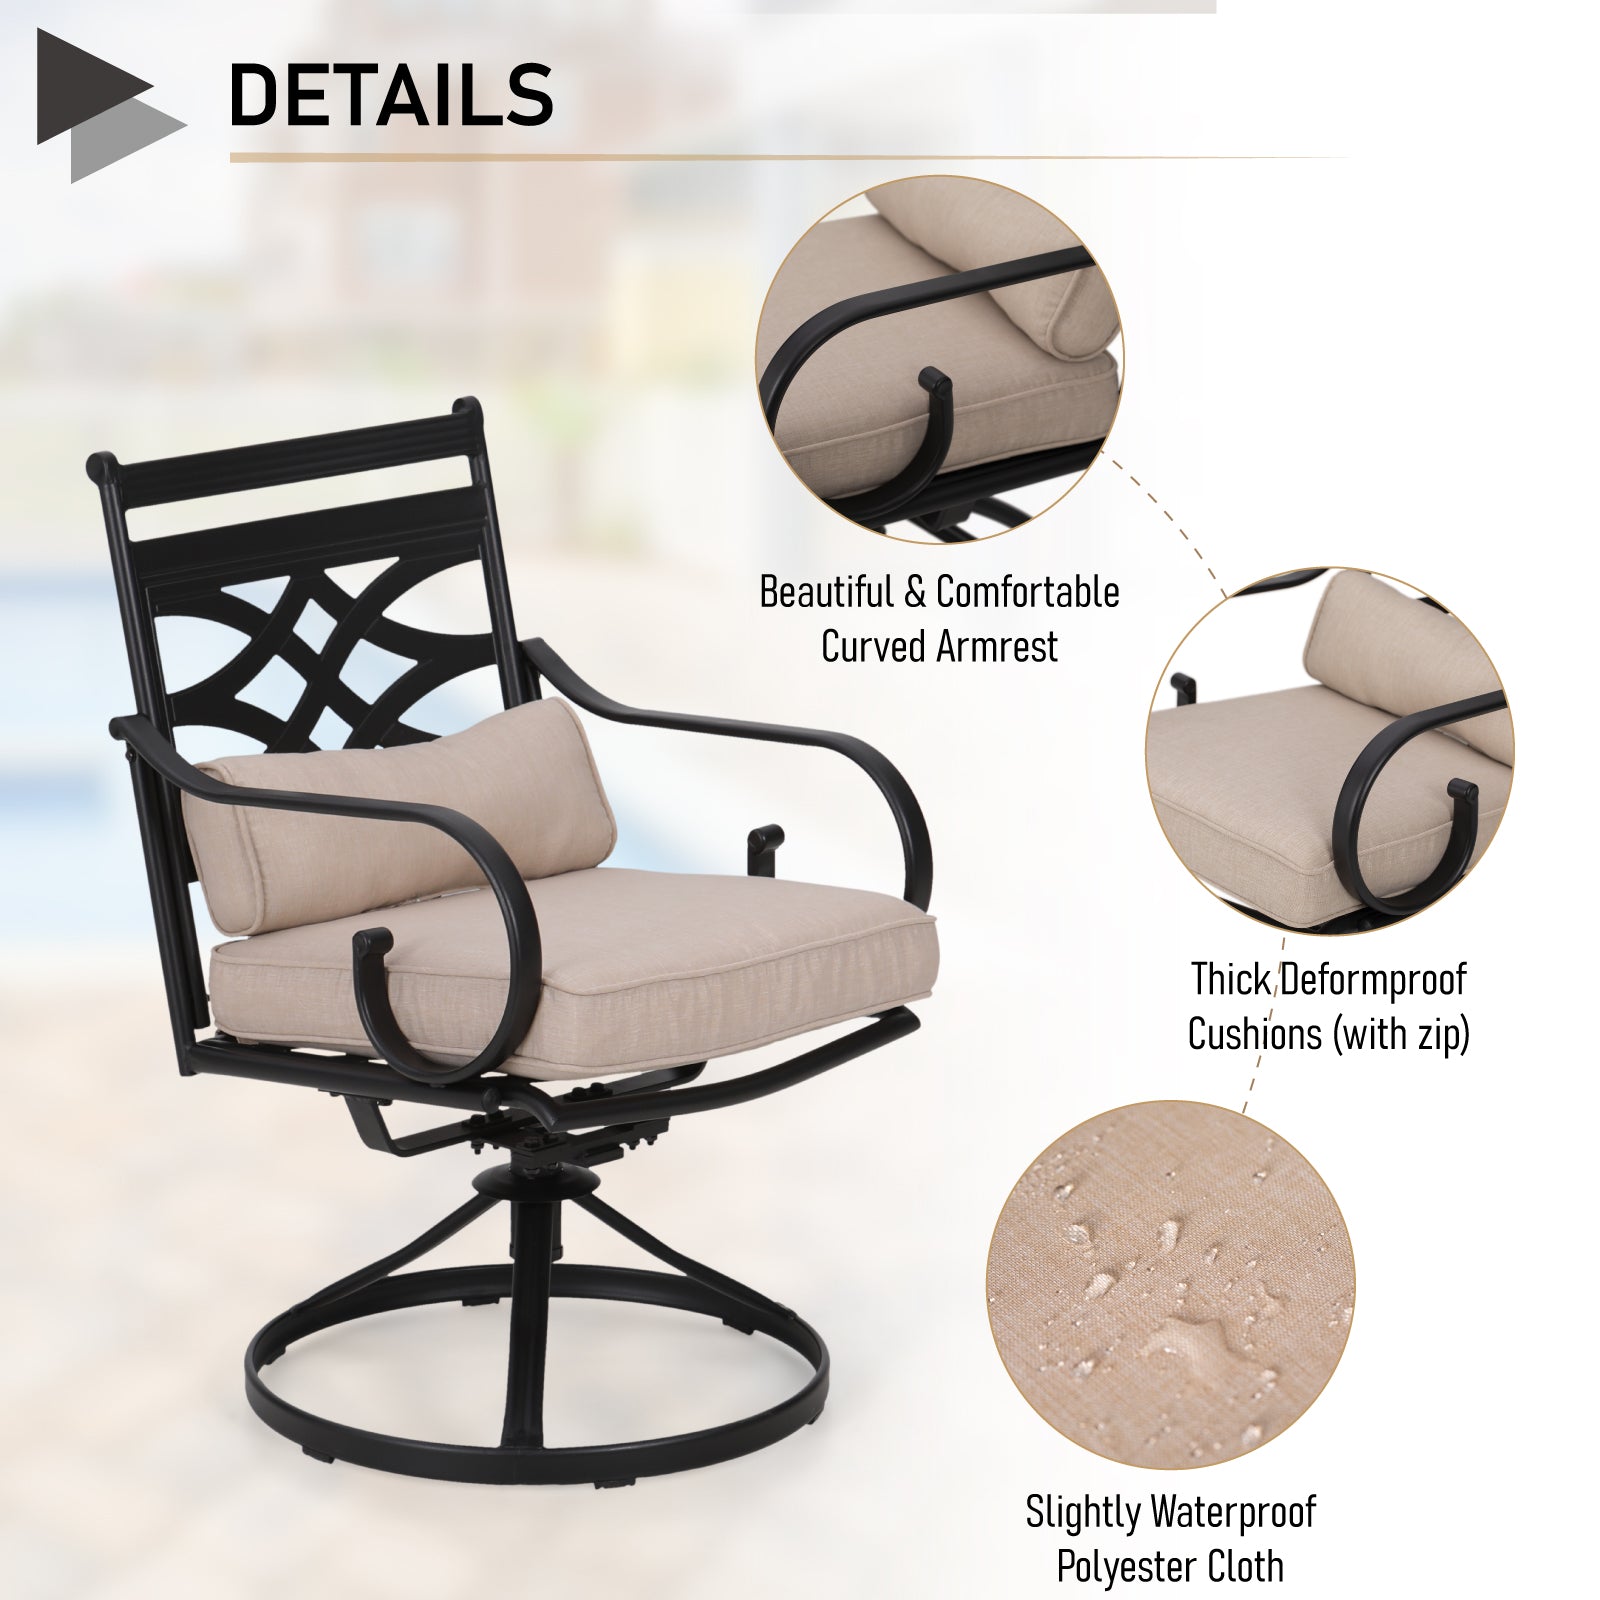 MFSTUDIO 6-Piece Outdoor Dining Set with Umbrella Steel Square Table & Elegant Cast Iron Pattern Dining Chairs